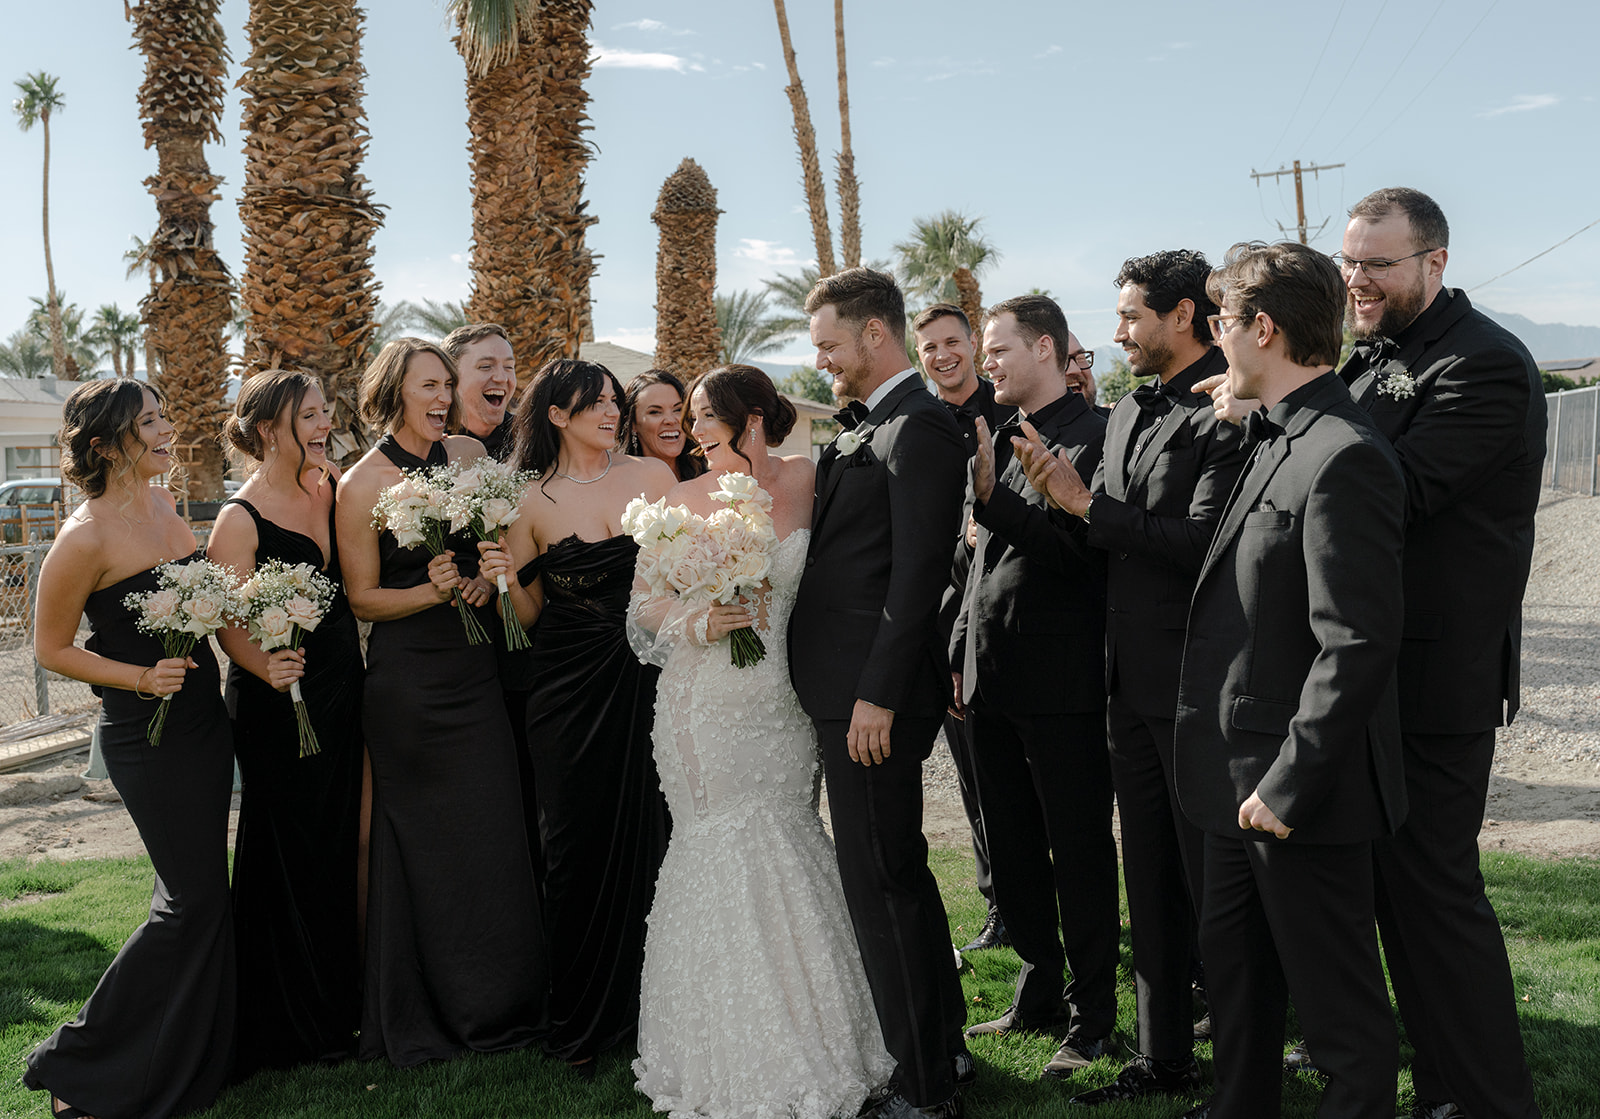 A newlywed couple and their bridal party laugh together